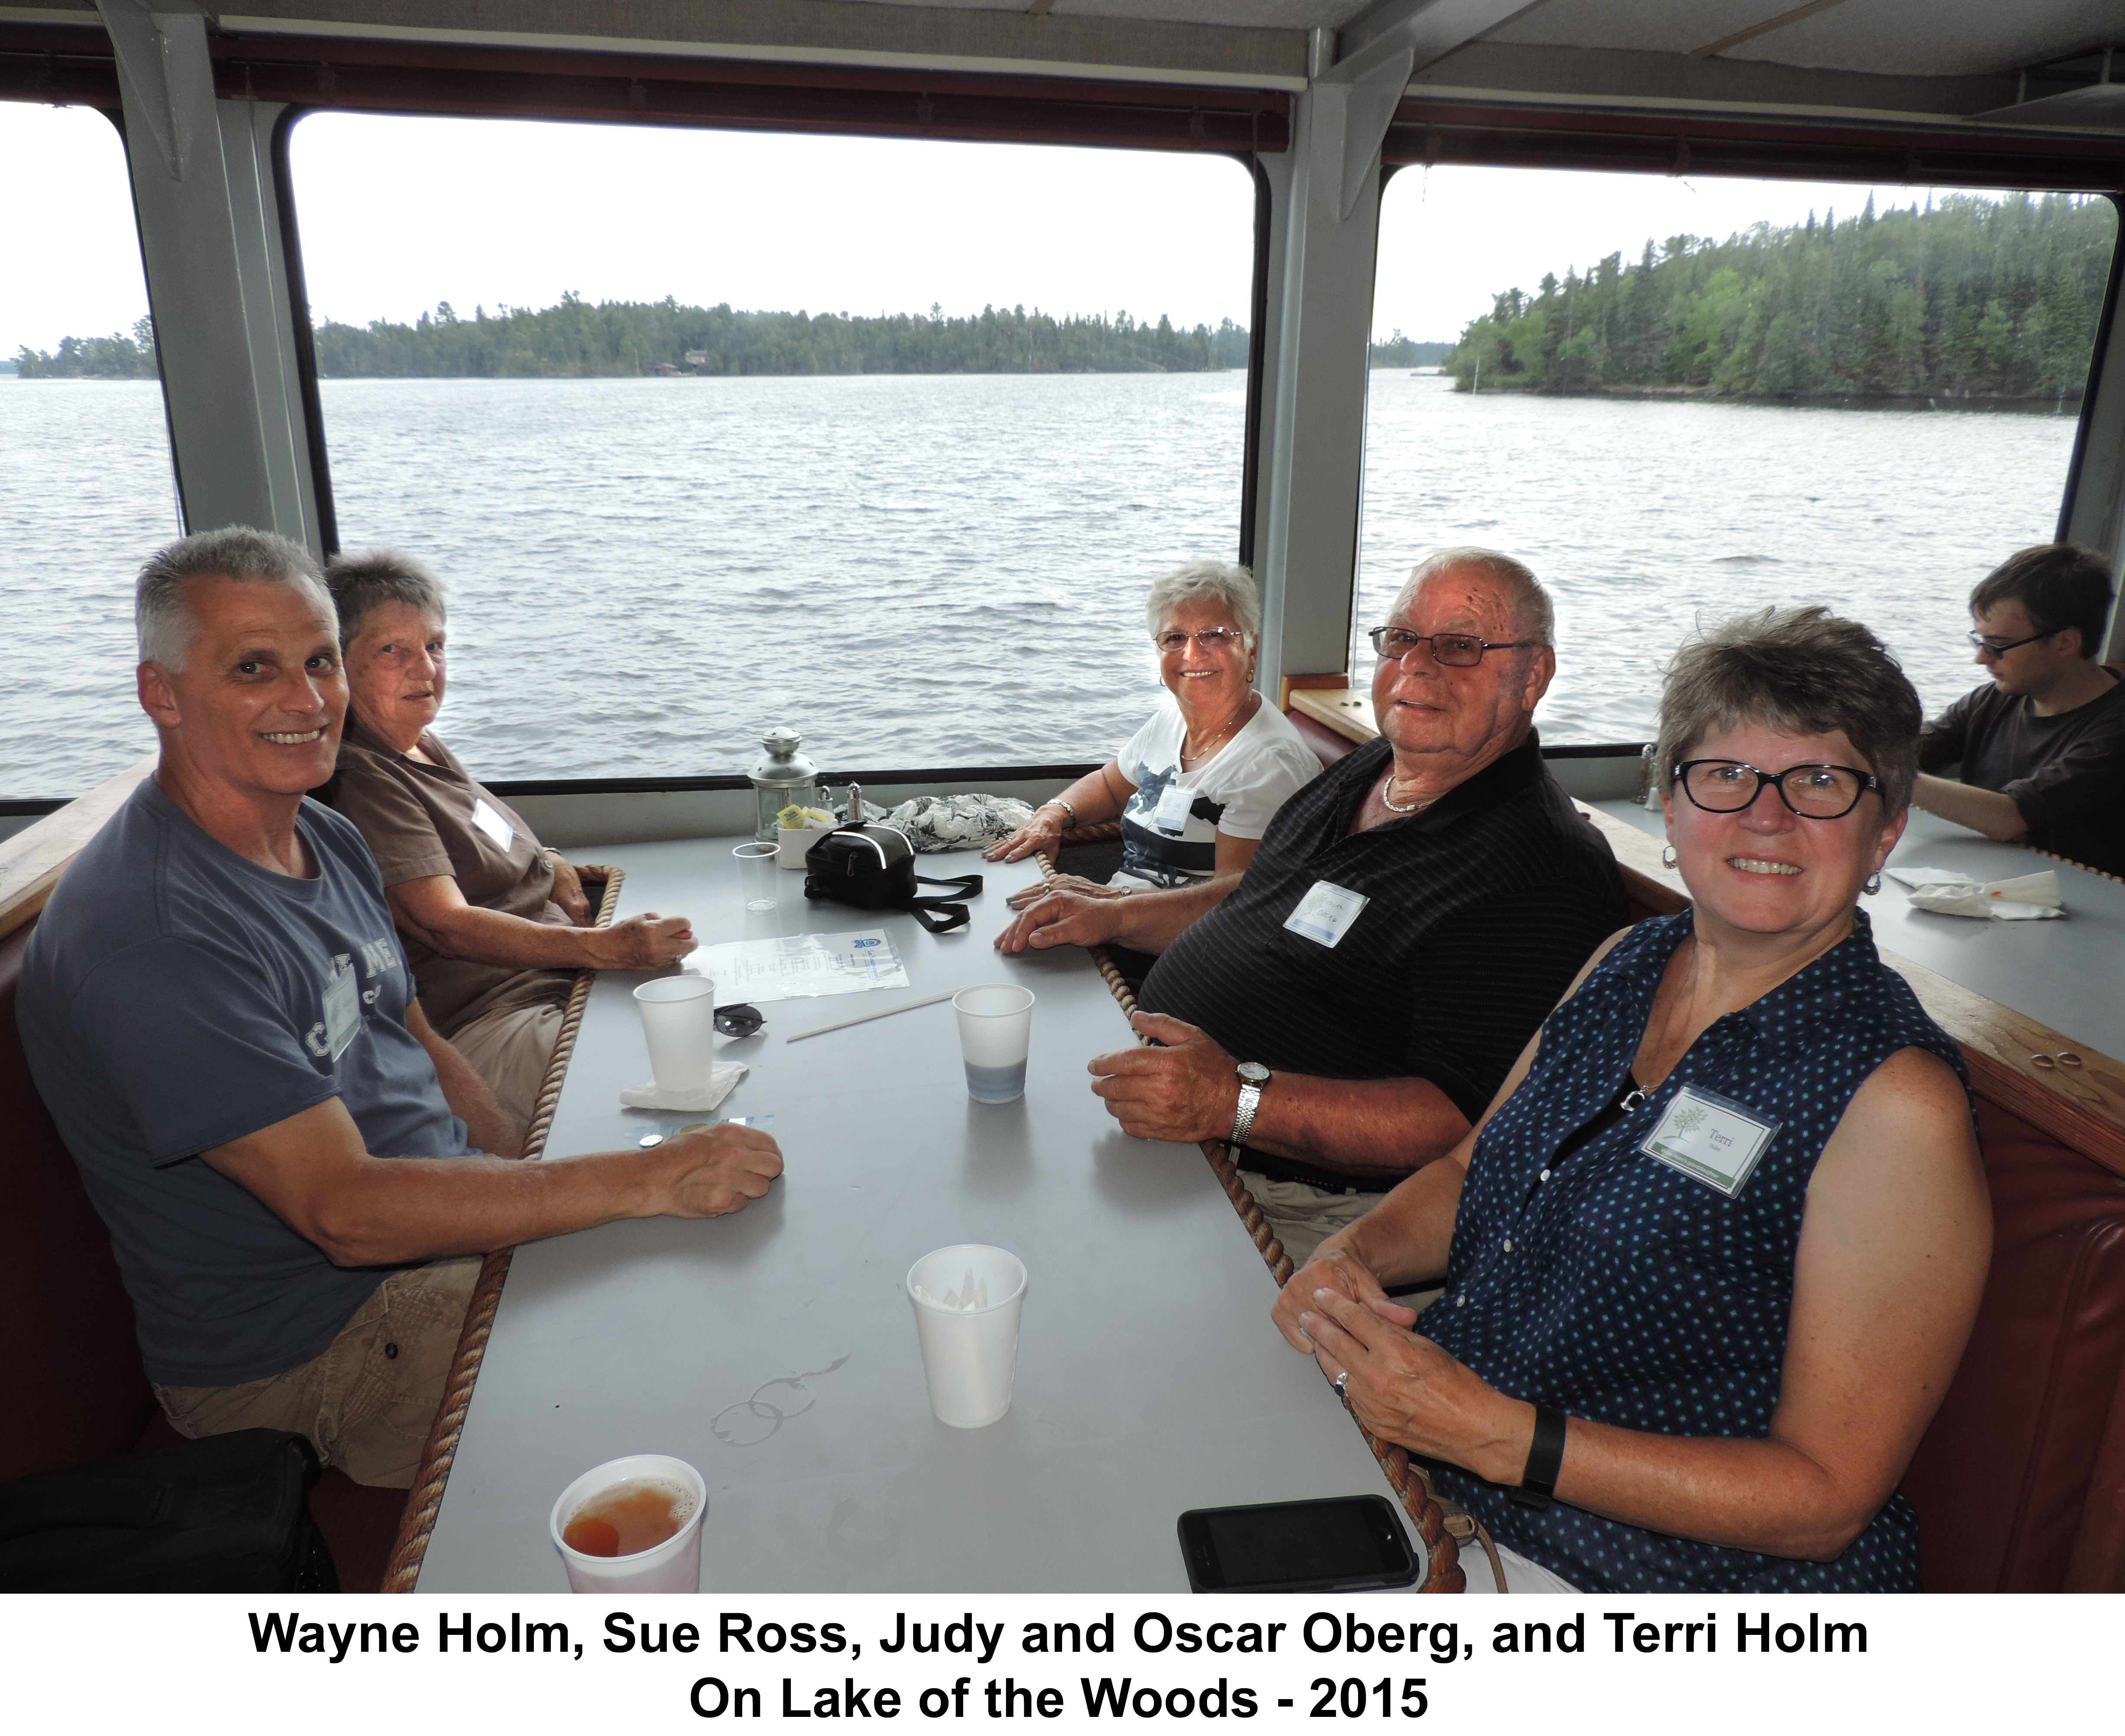 Wayne, Sue, Judy, Oscar, and Terri sitting at a table in front of 
             a window looking out on Lake of the Woods